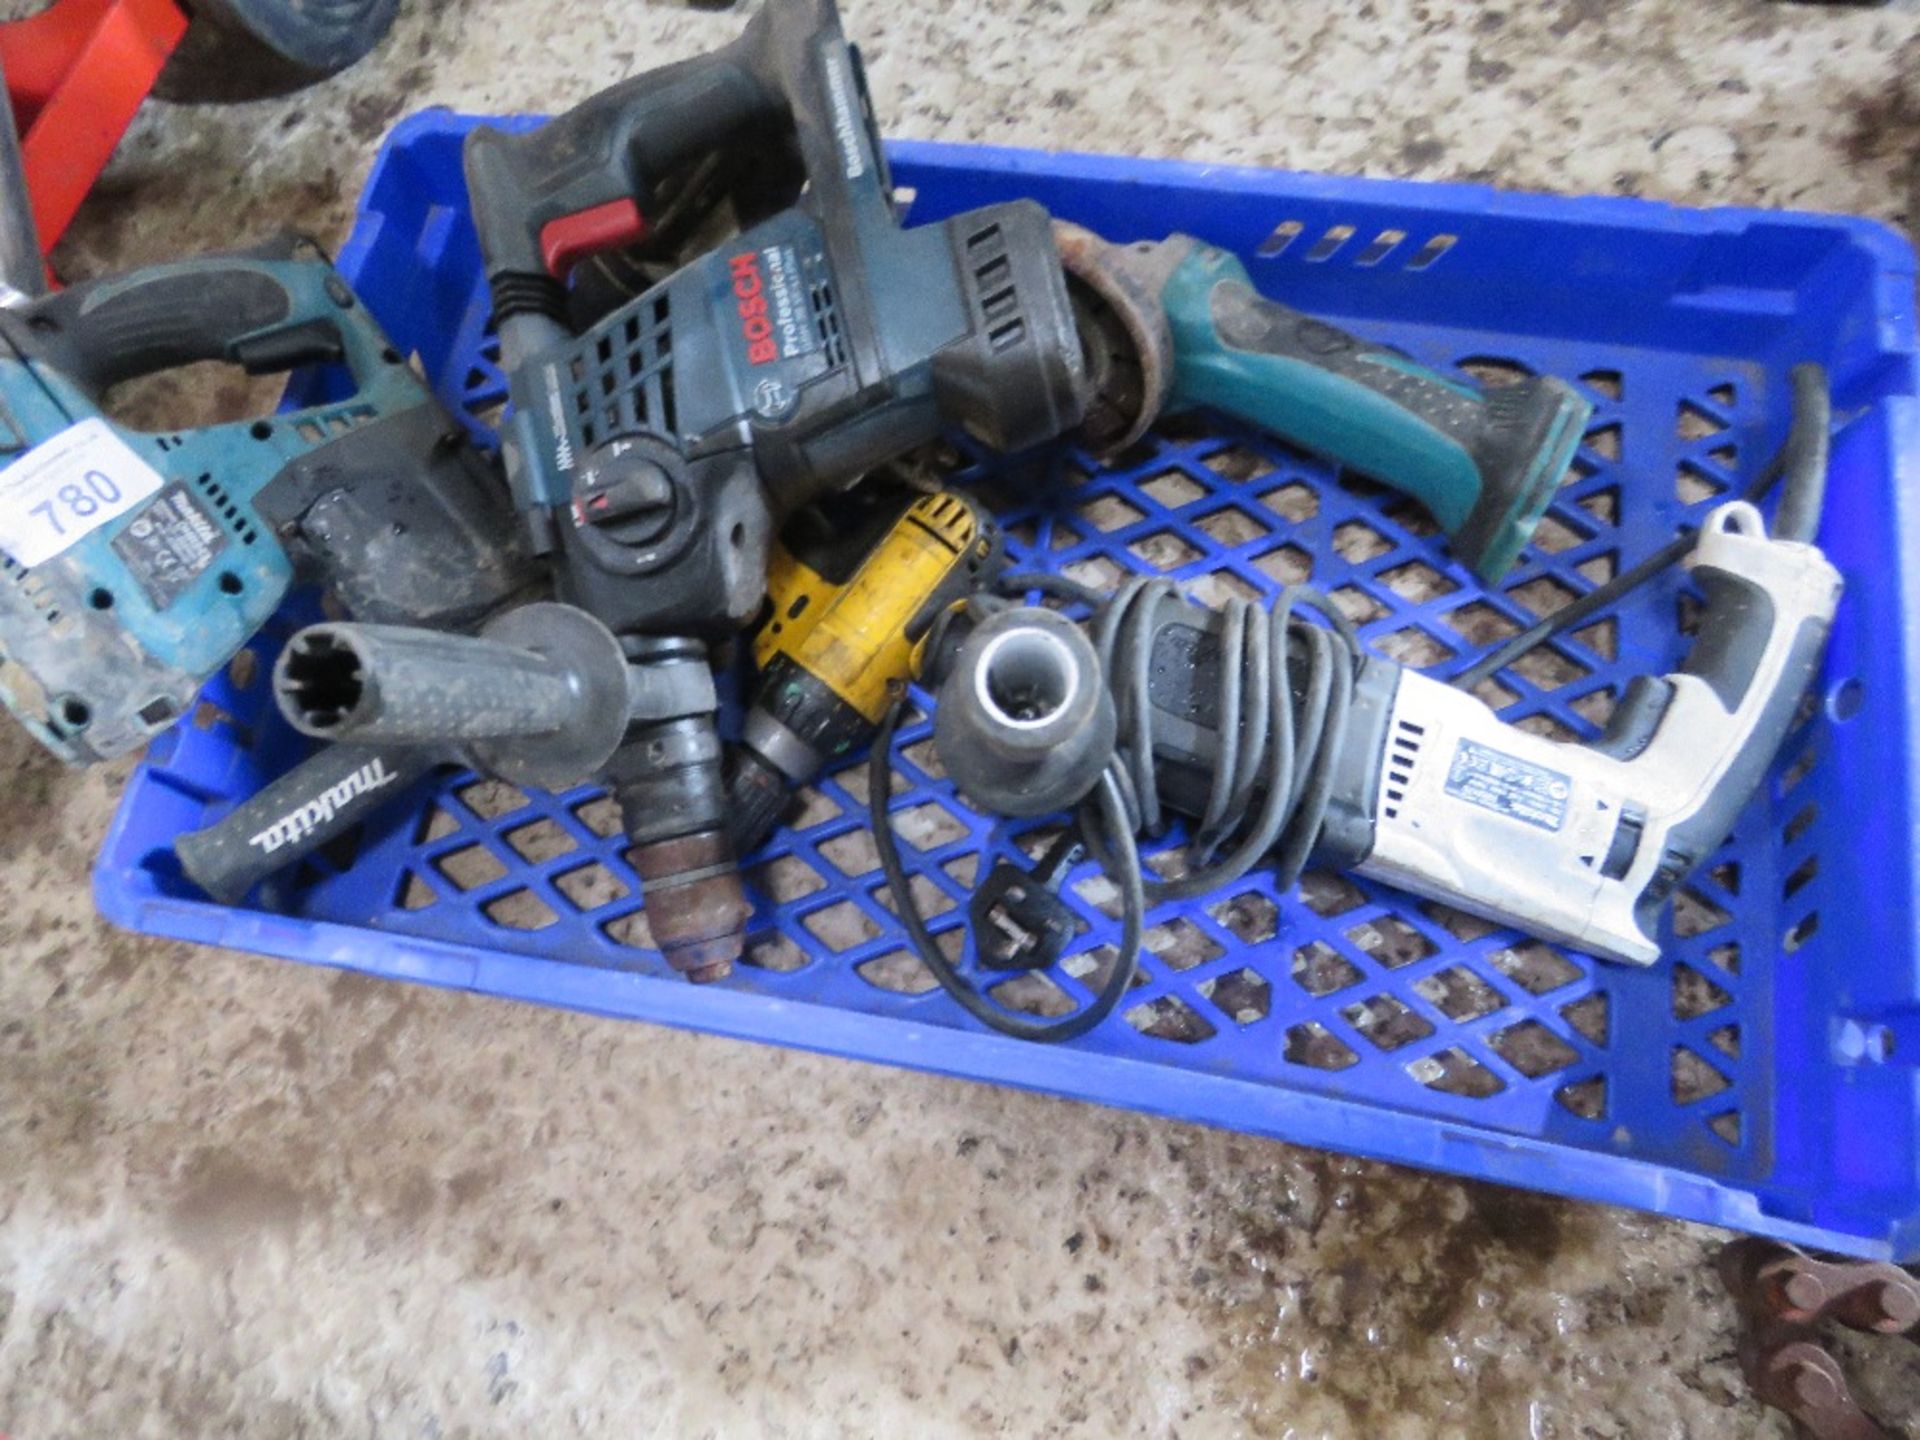 6NO DRILLS/POWER TOOLS AS SHOWN. - Image 6 of 7